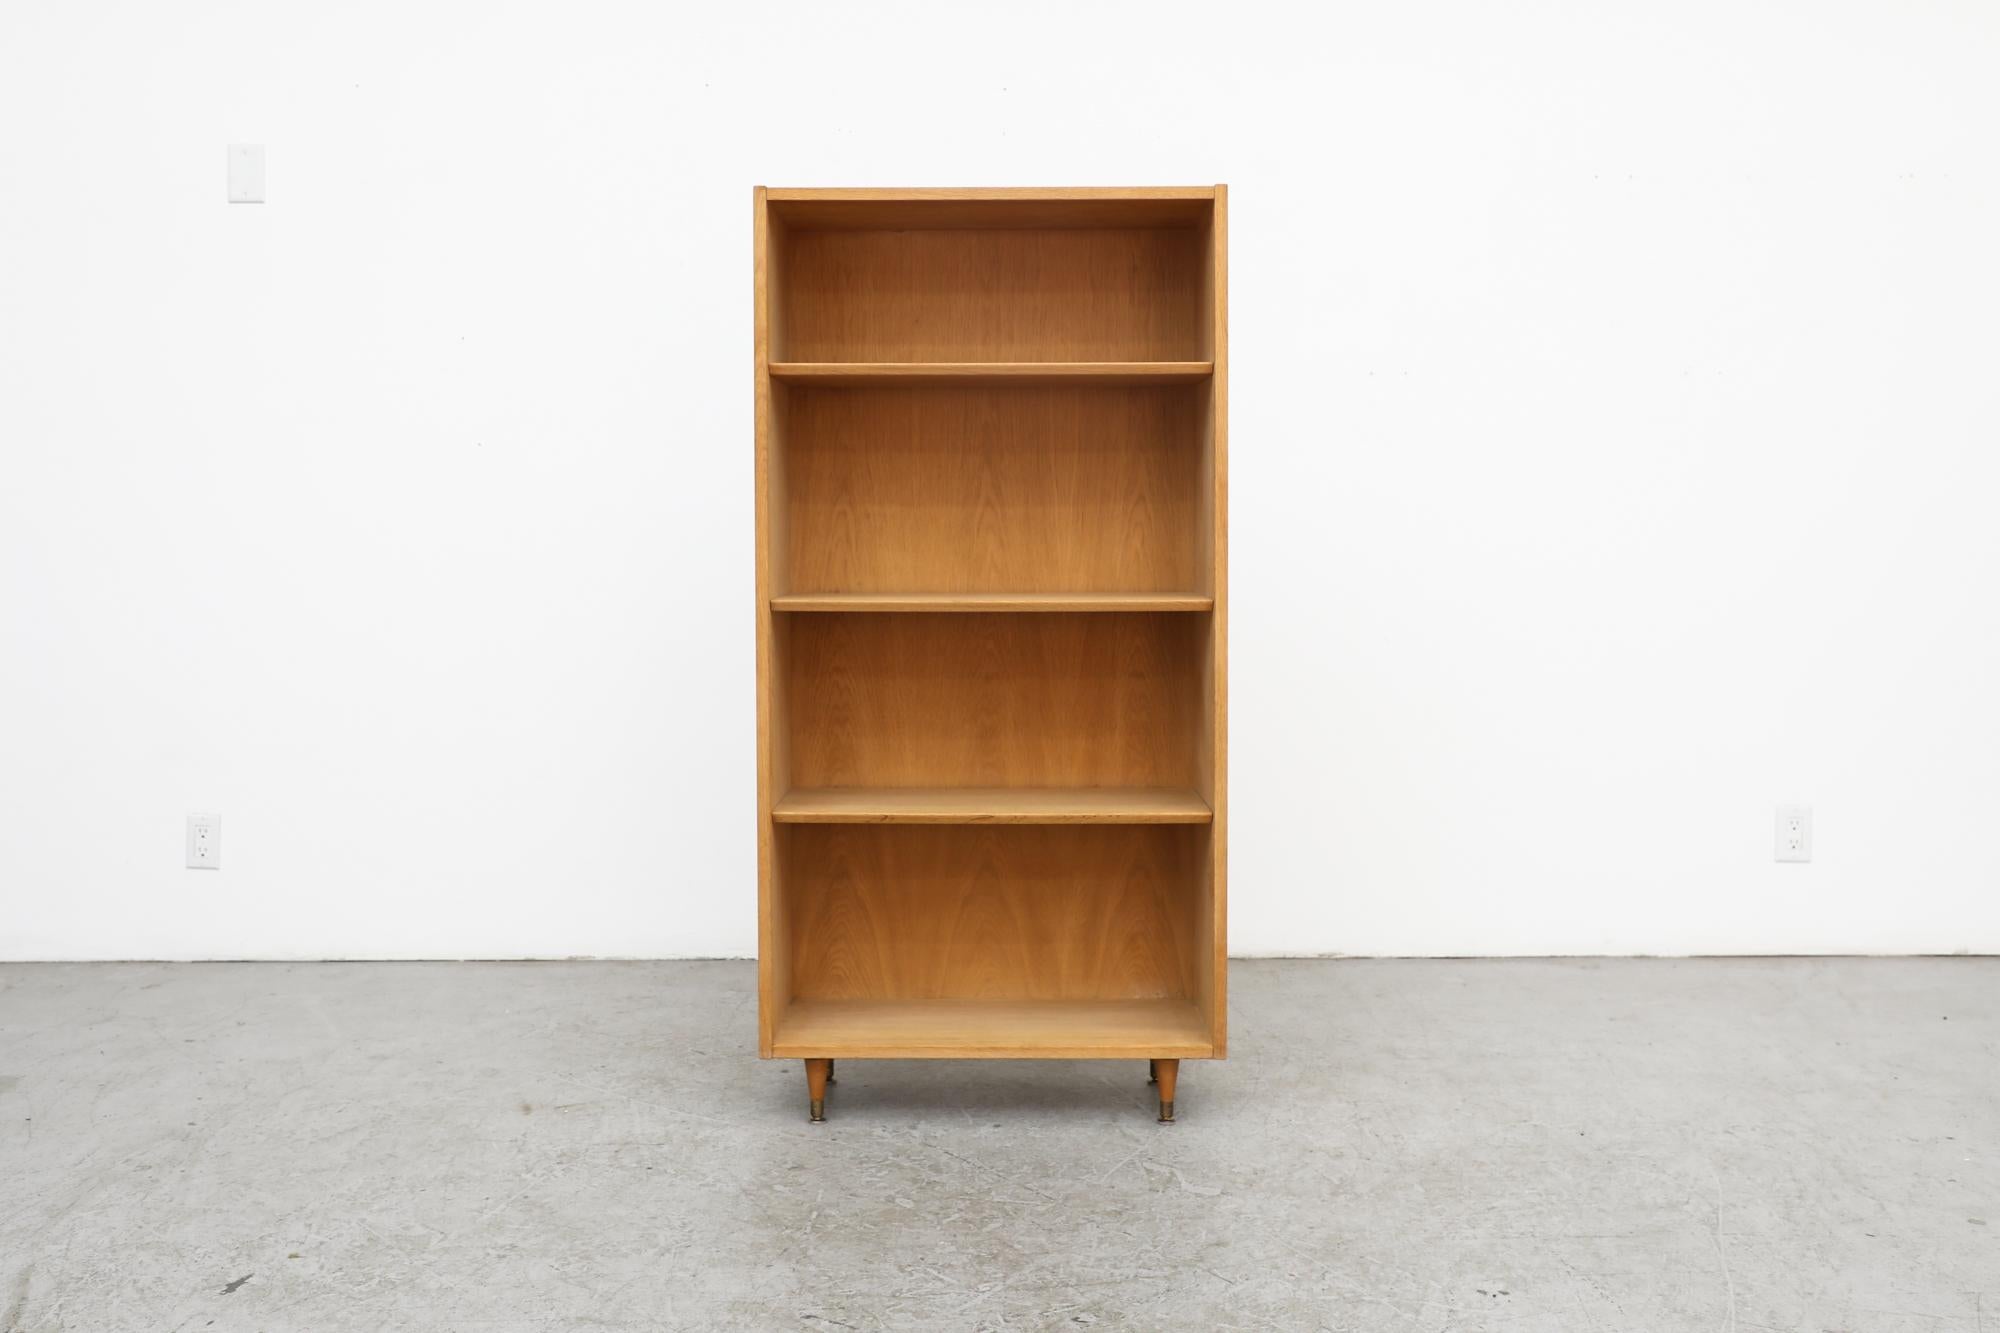 Tall Mid-Century Danish open bookcase in oak with tapered legs and adjustable height shelves. Legs may not be original to the unit. In otherwise original condition with visible wear, consistent with its age and use.